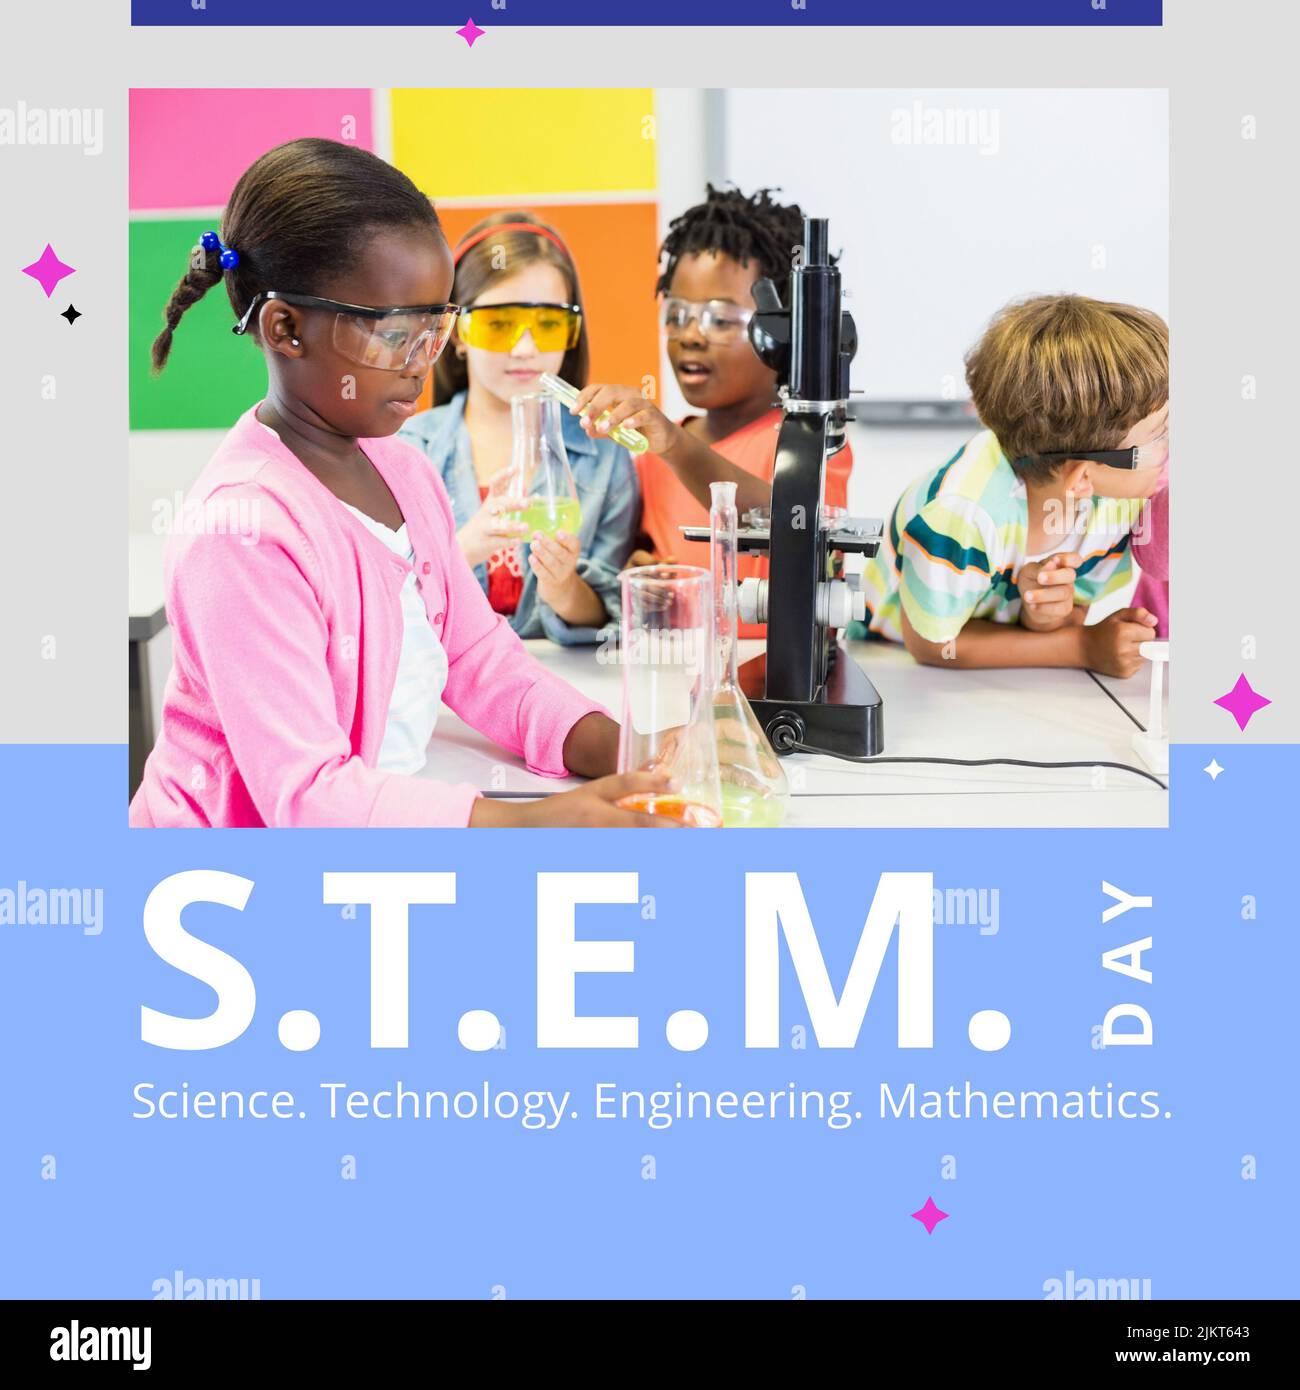 Square image of stem day text and diverse schoolchildren in science class Stock Photo